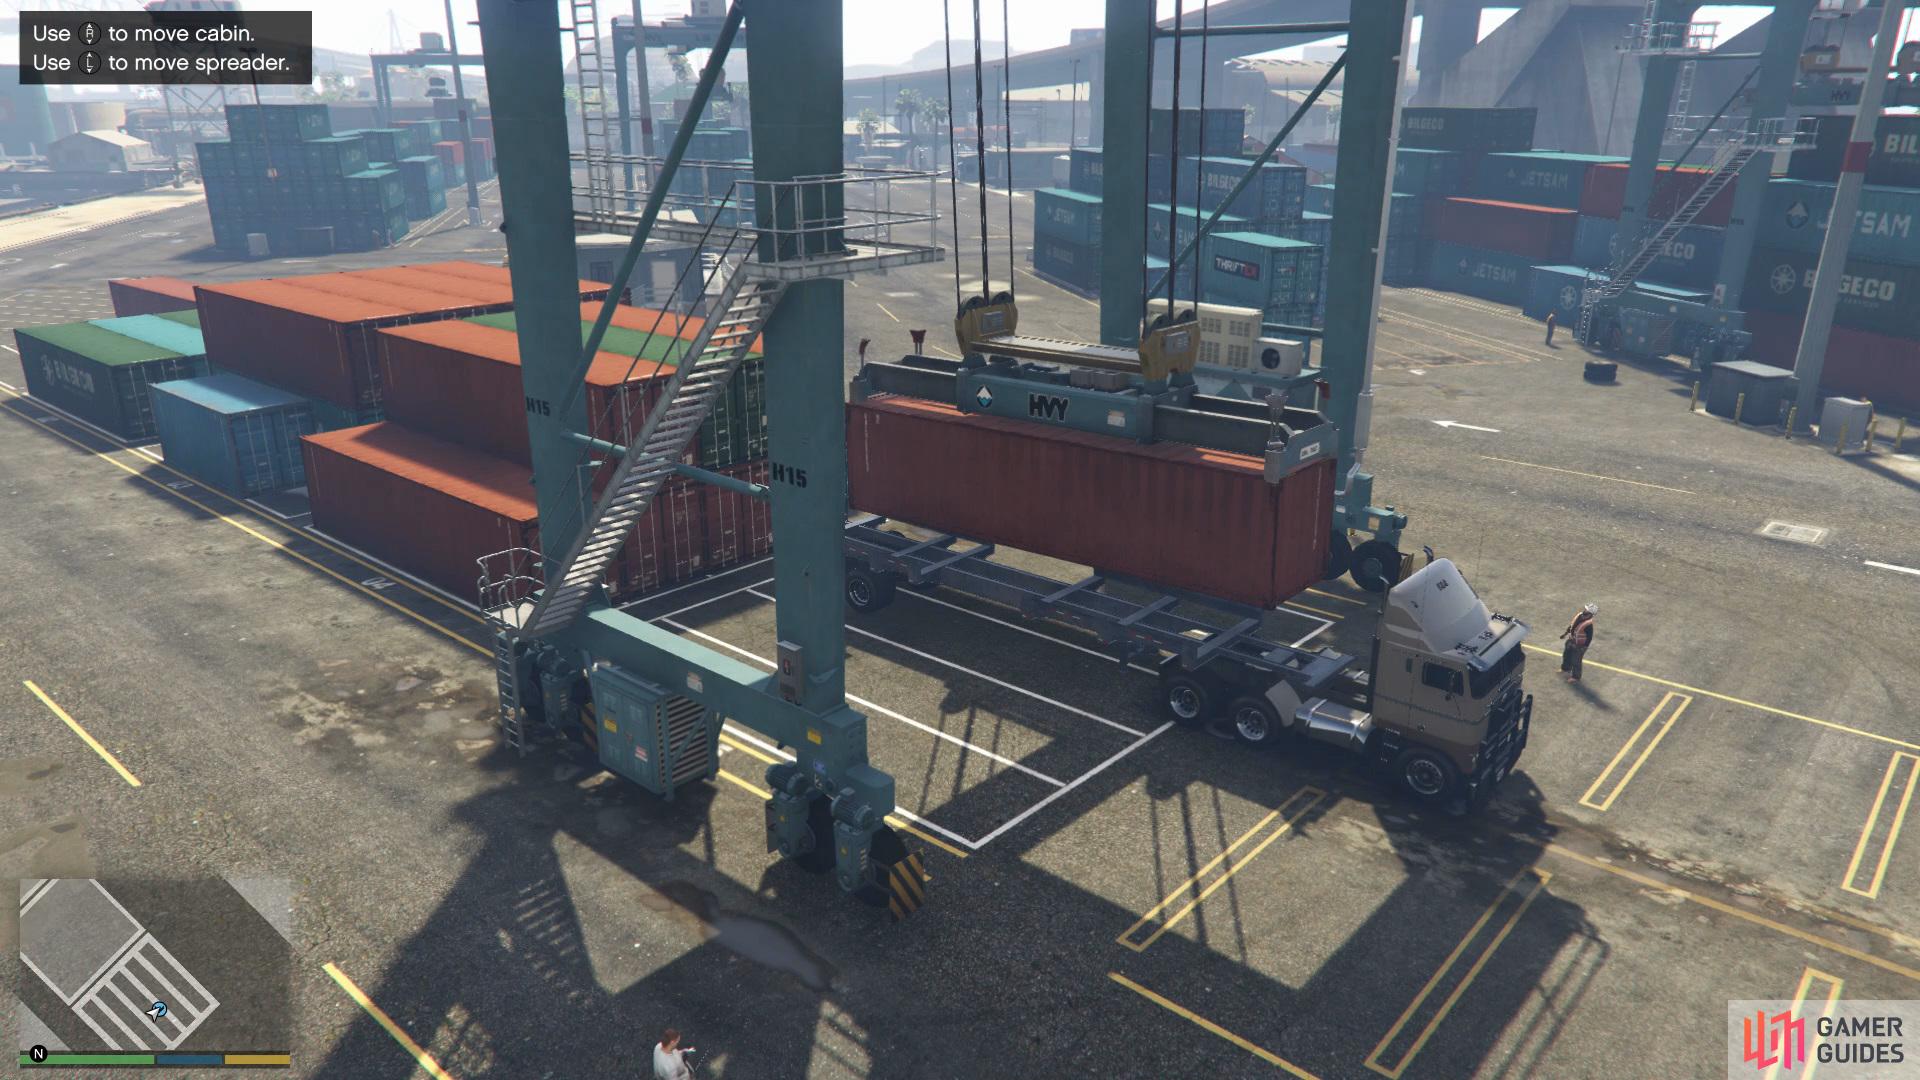 then load up two trucks with containers via the  crane.